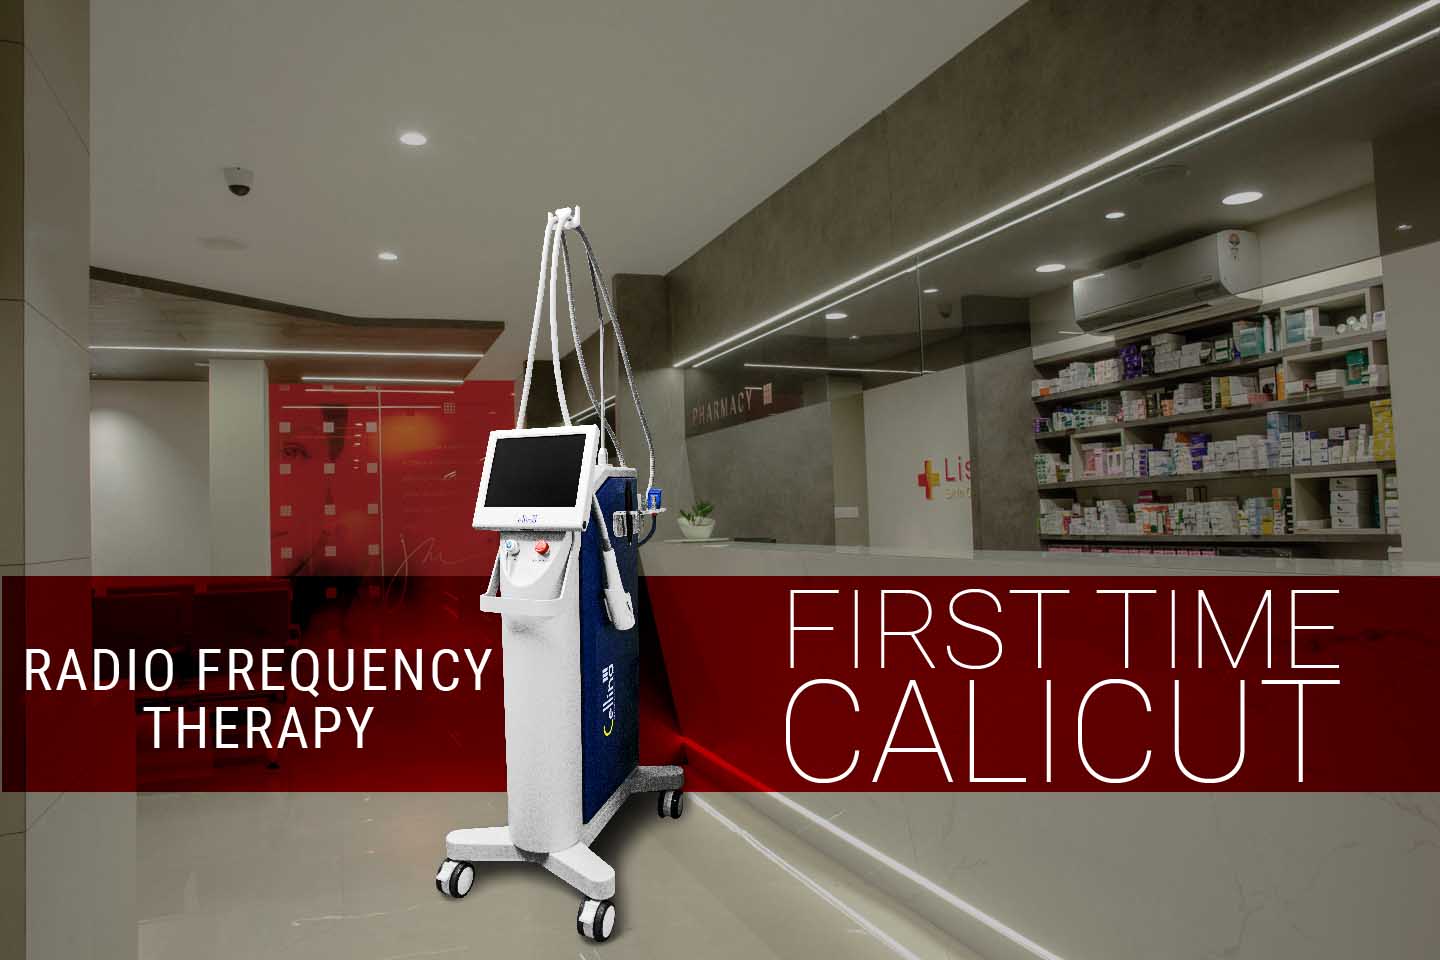 Lisa skin clinic, Calicut, Radiofrequency Therapy (RF therapy)